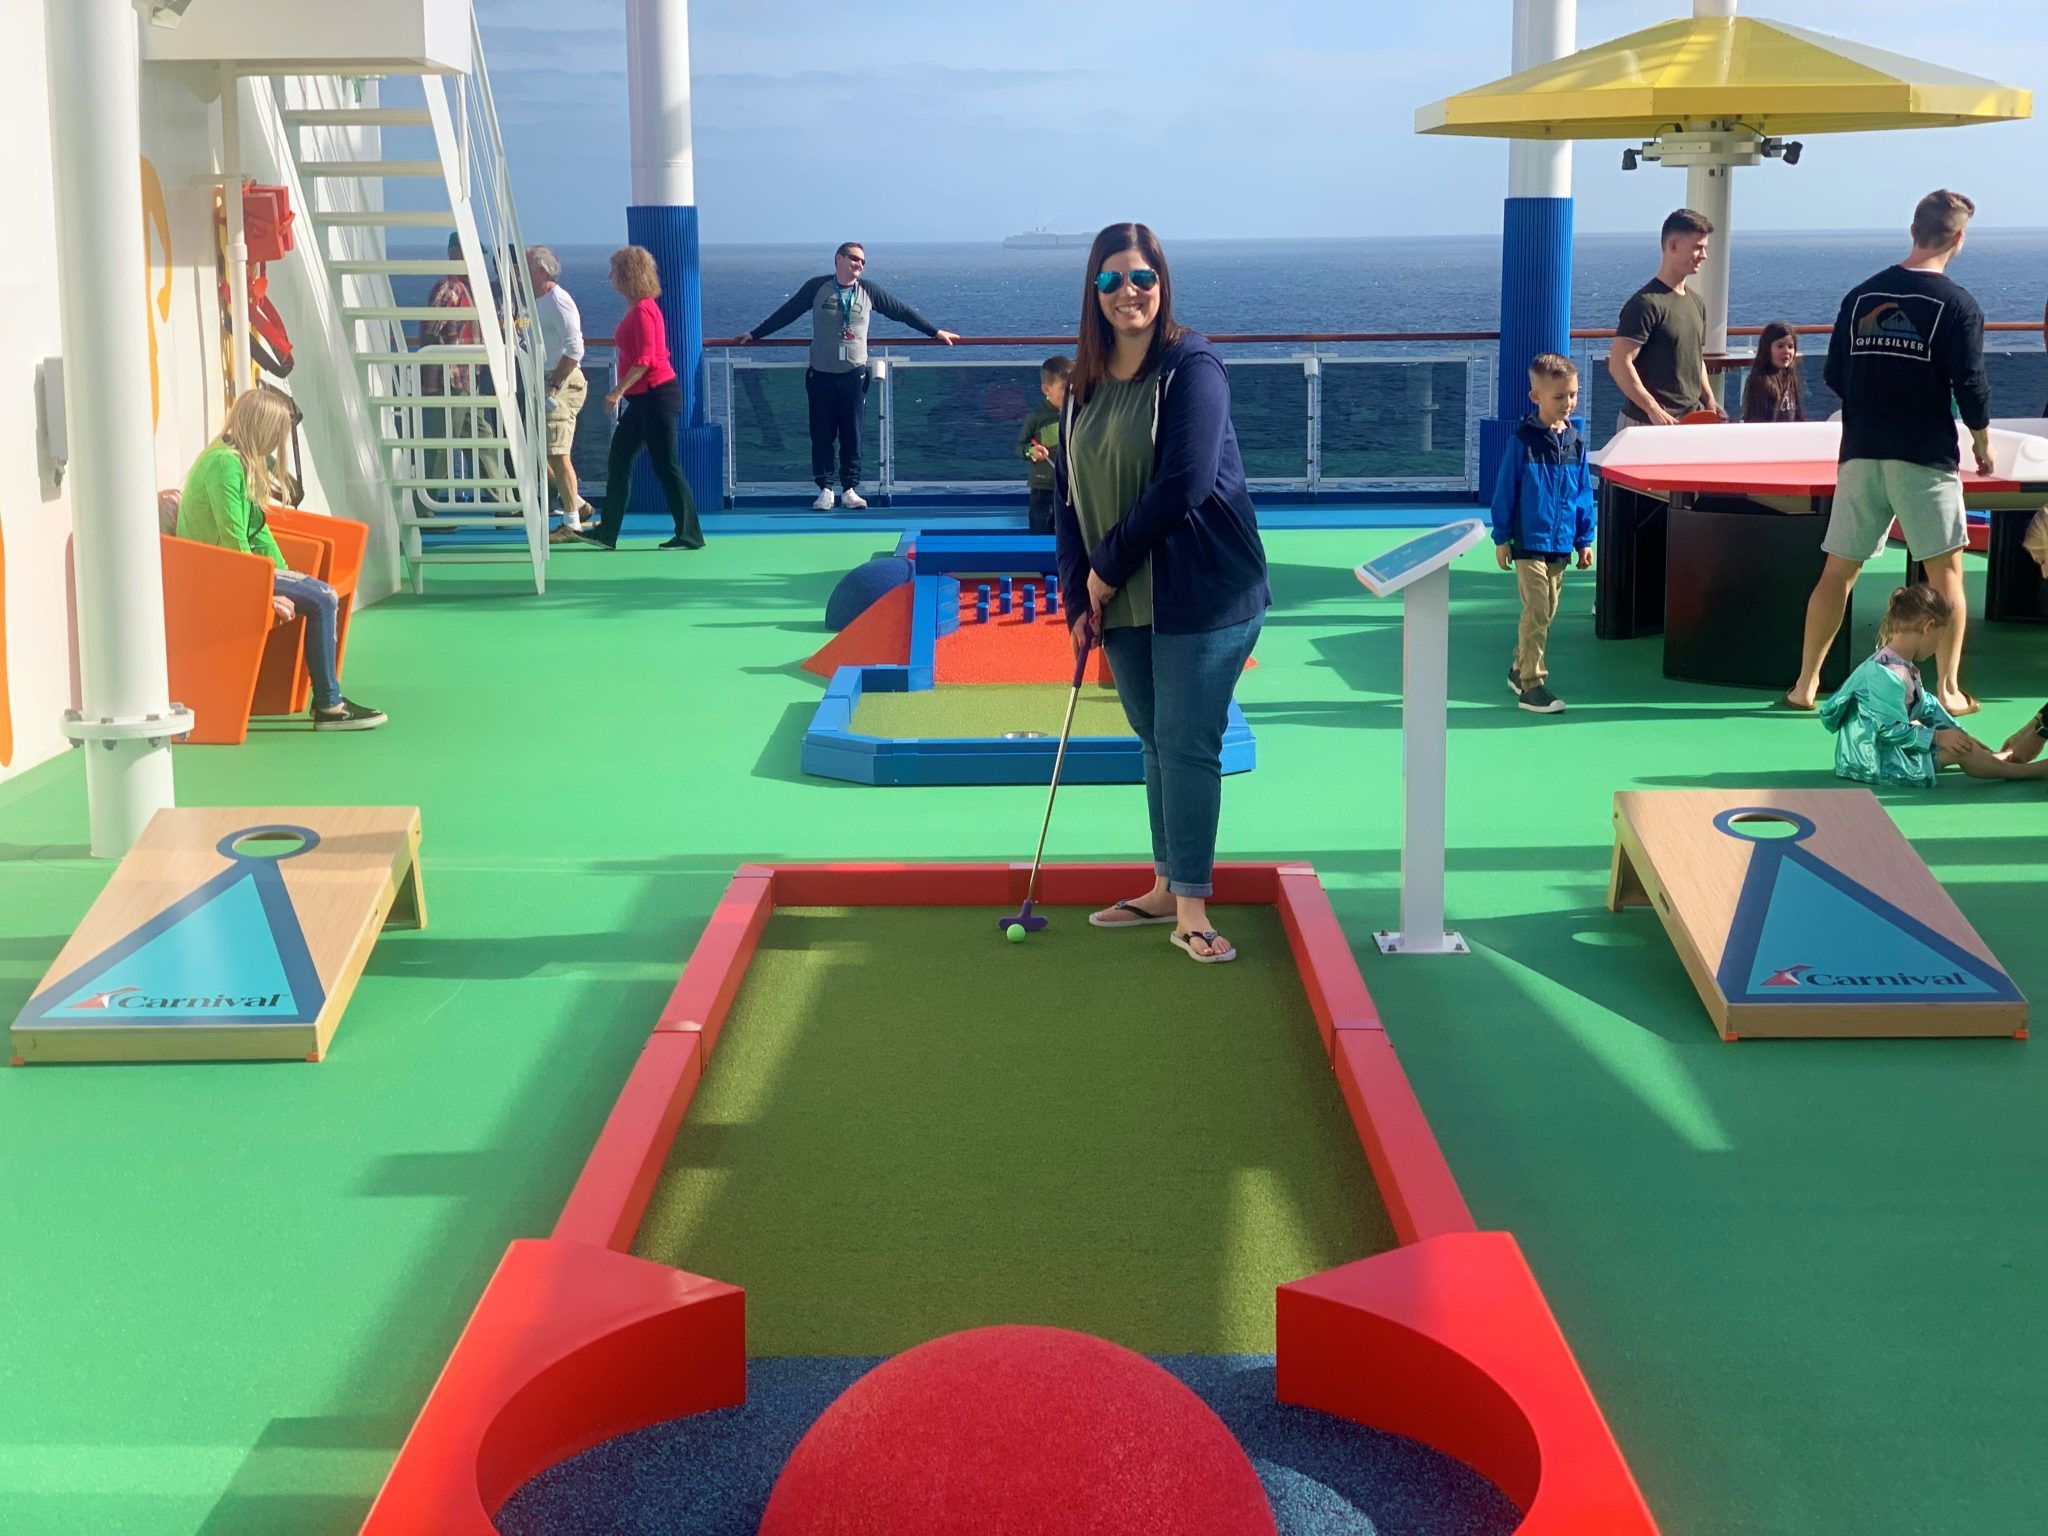 Carnival Panorama Mexican Riviera Cruise Review